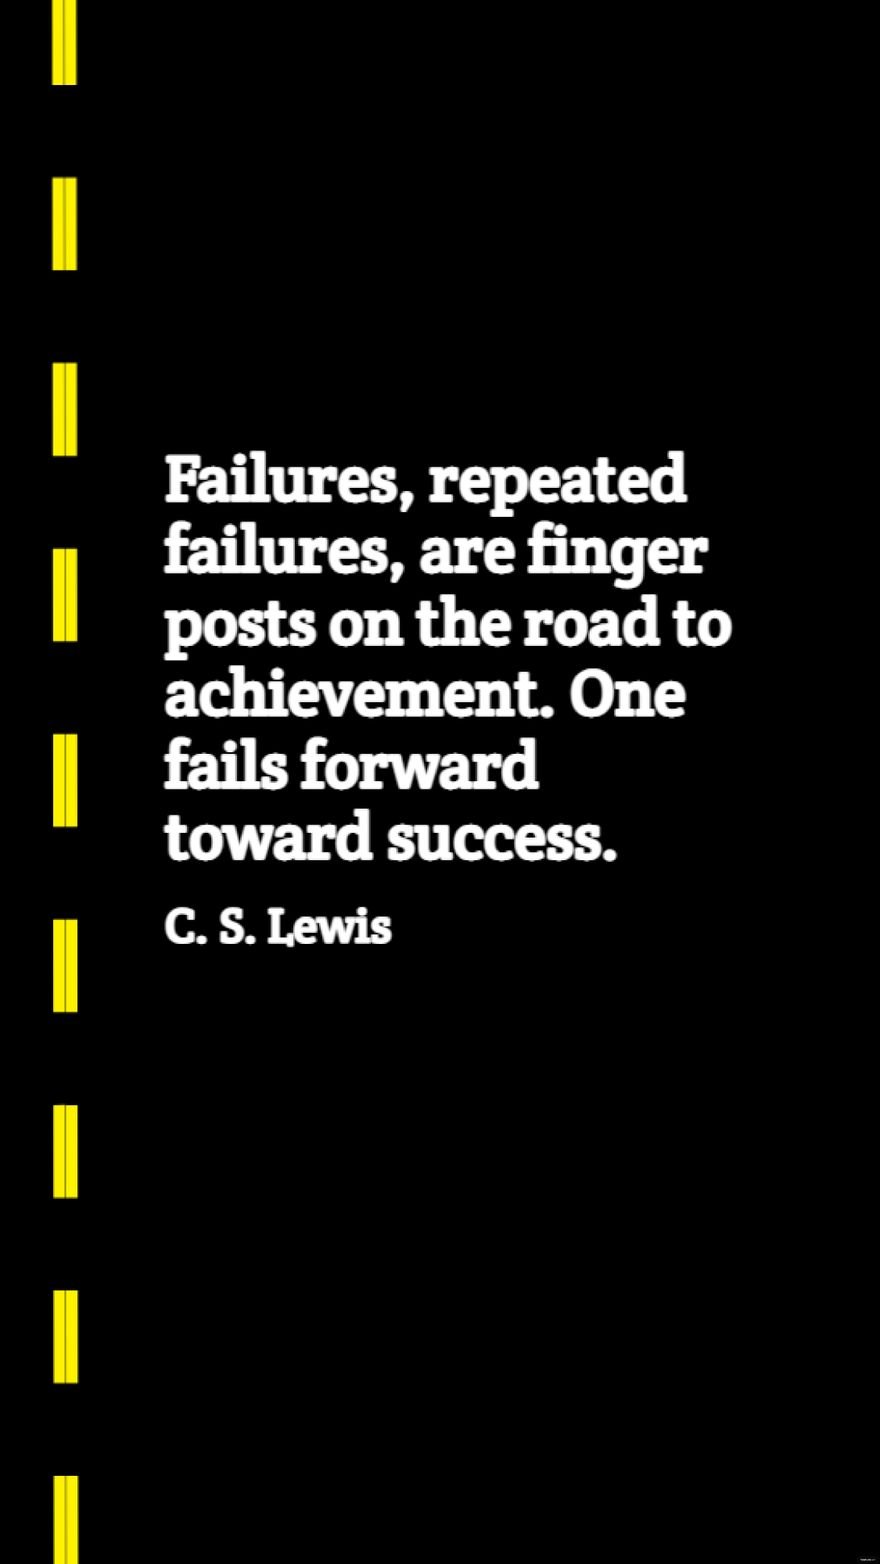 C. S. Lewis - Failures, repeated failures, are finger posts on the road to achievement. One fails forward toward success.